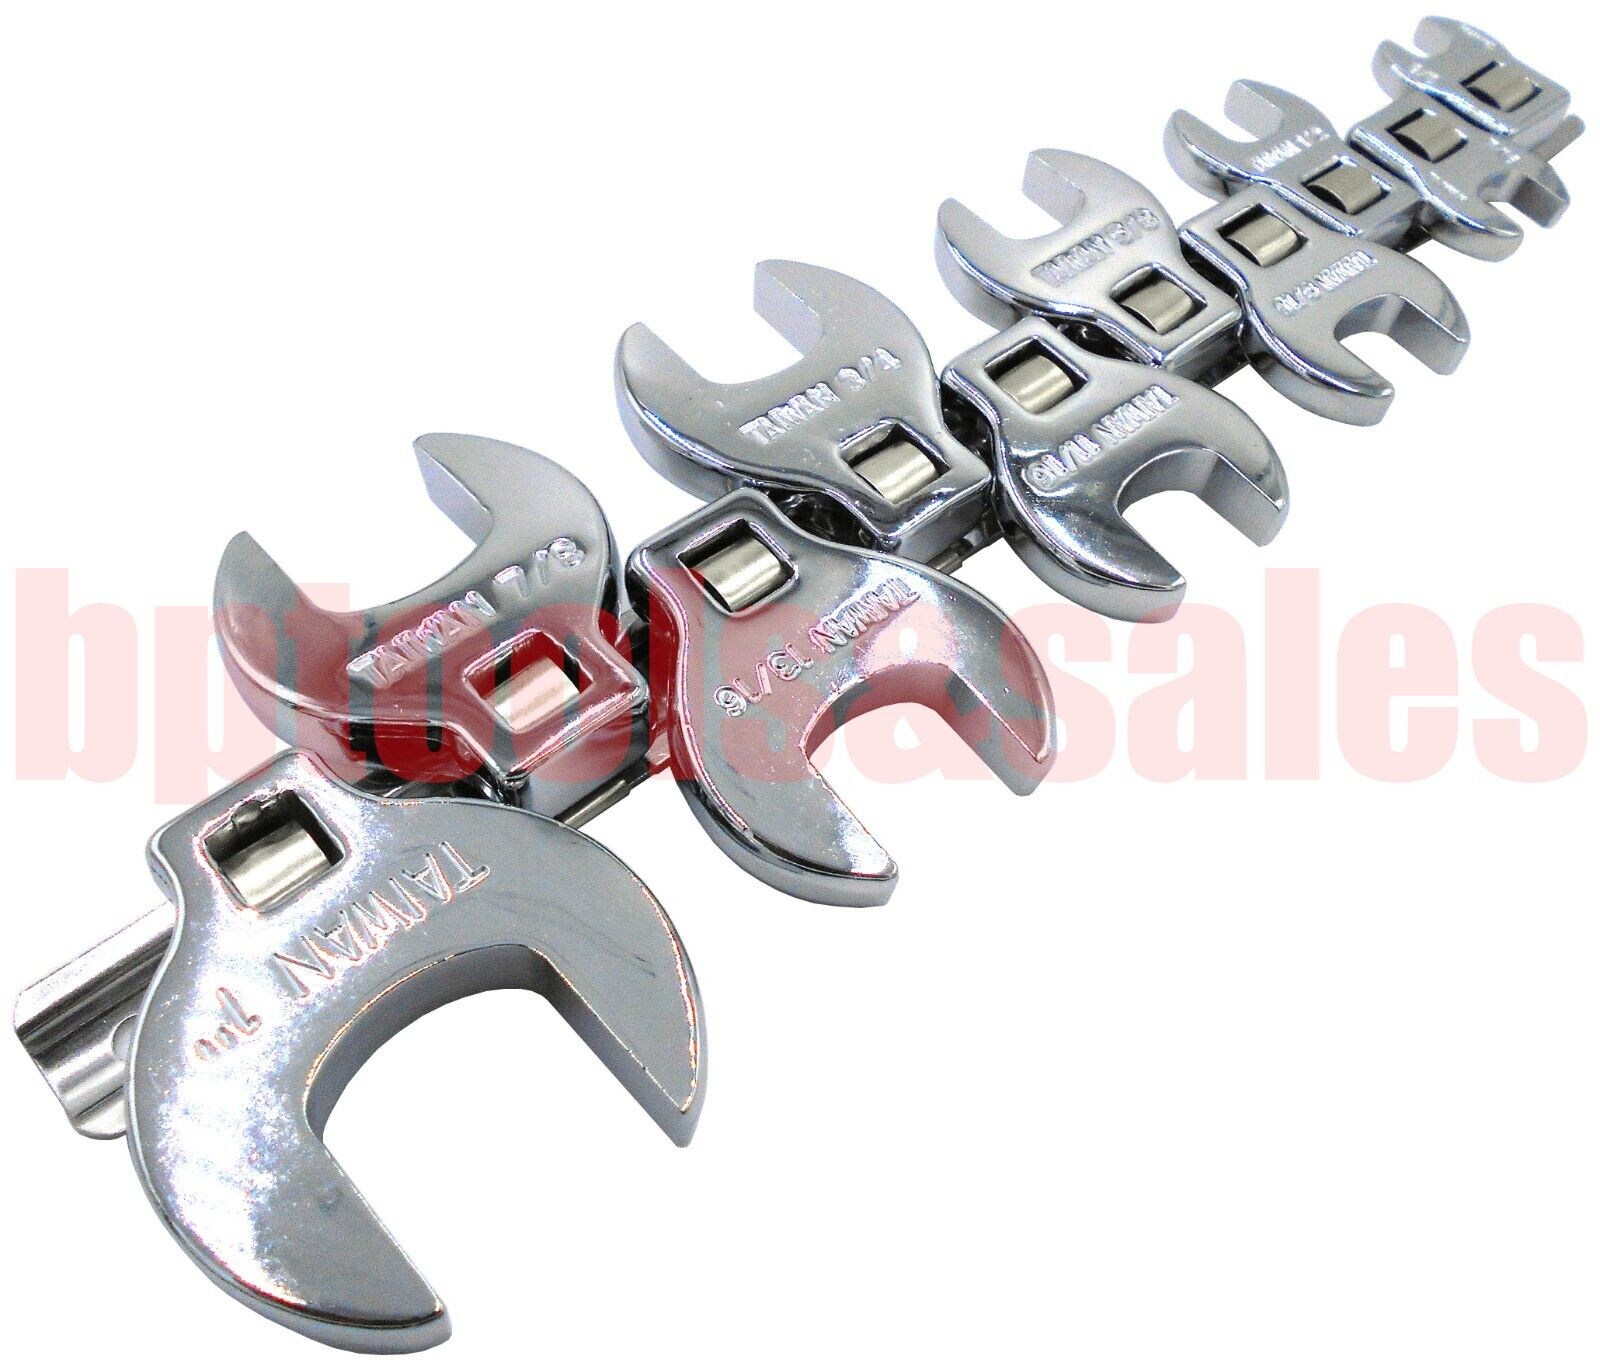 10pc 3/8" DR. (SAE) Crowfoot Wrench Set w/ Snap-on Snap-off Storage Rail